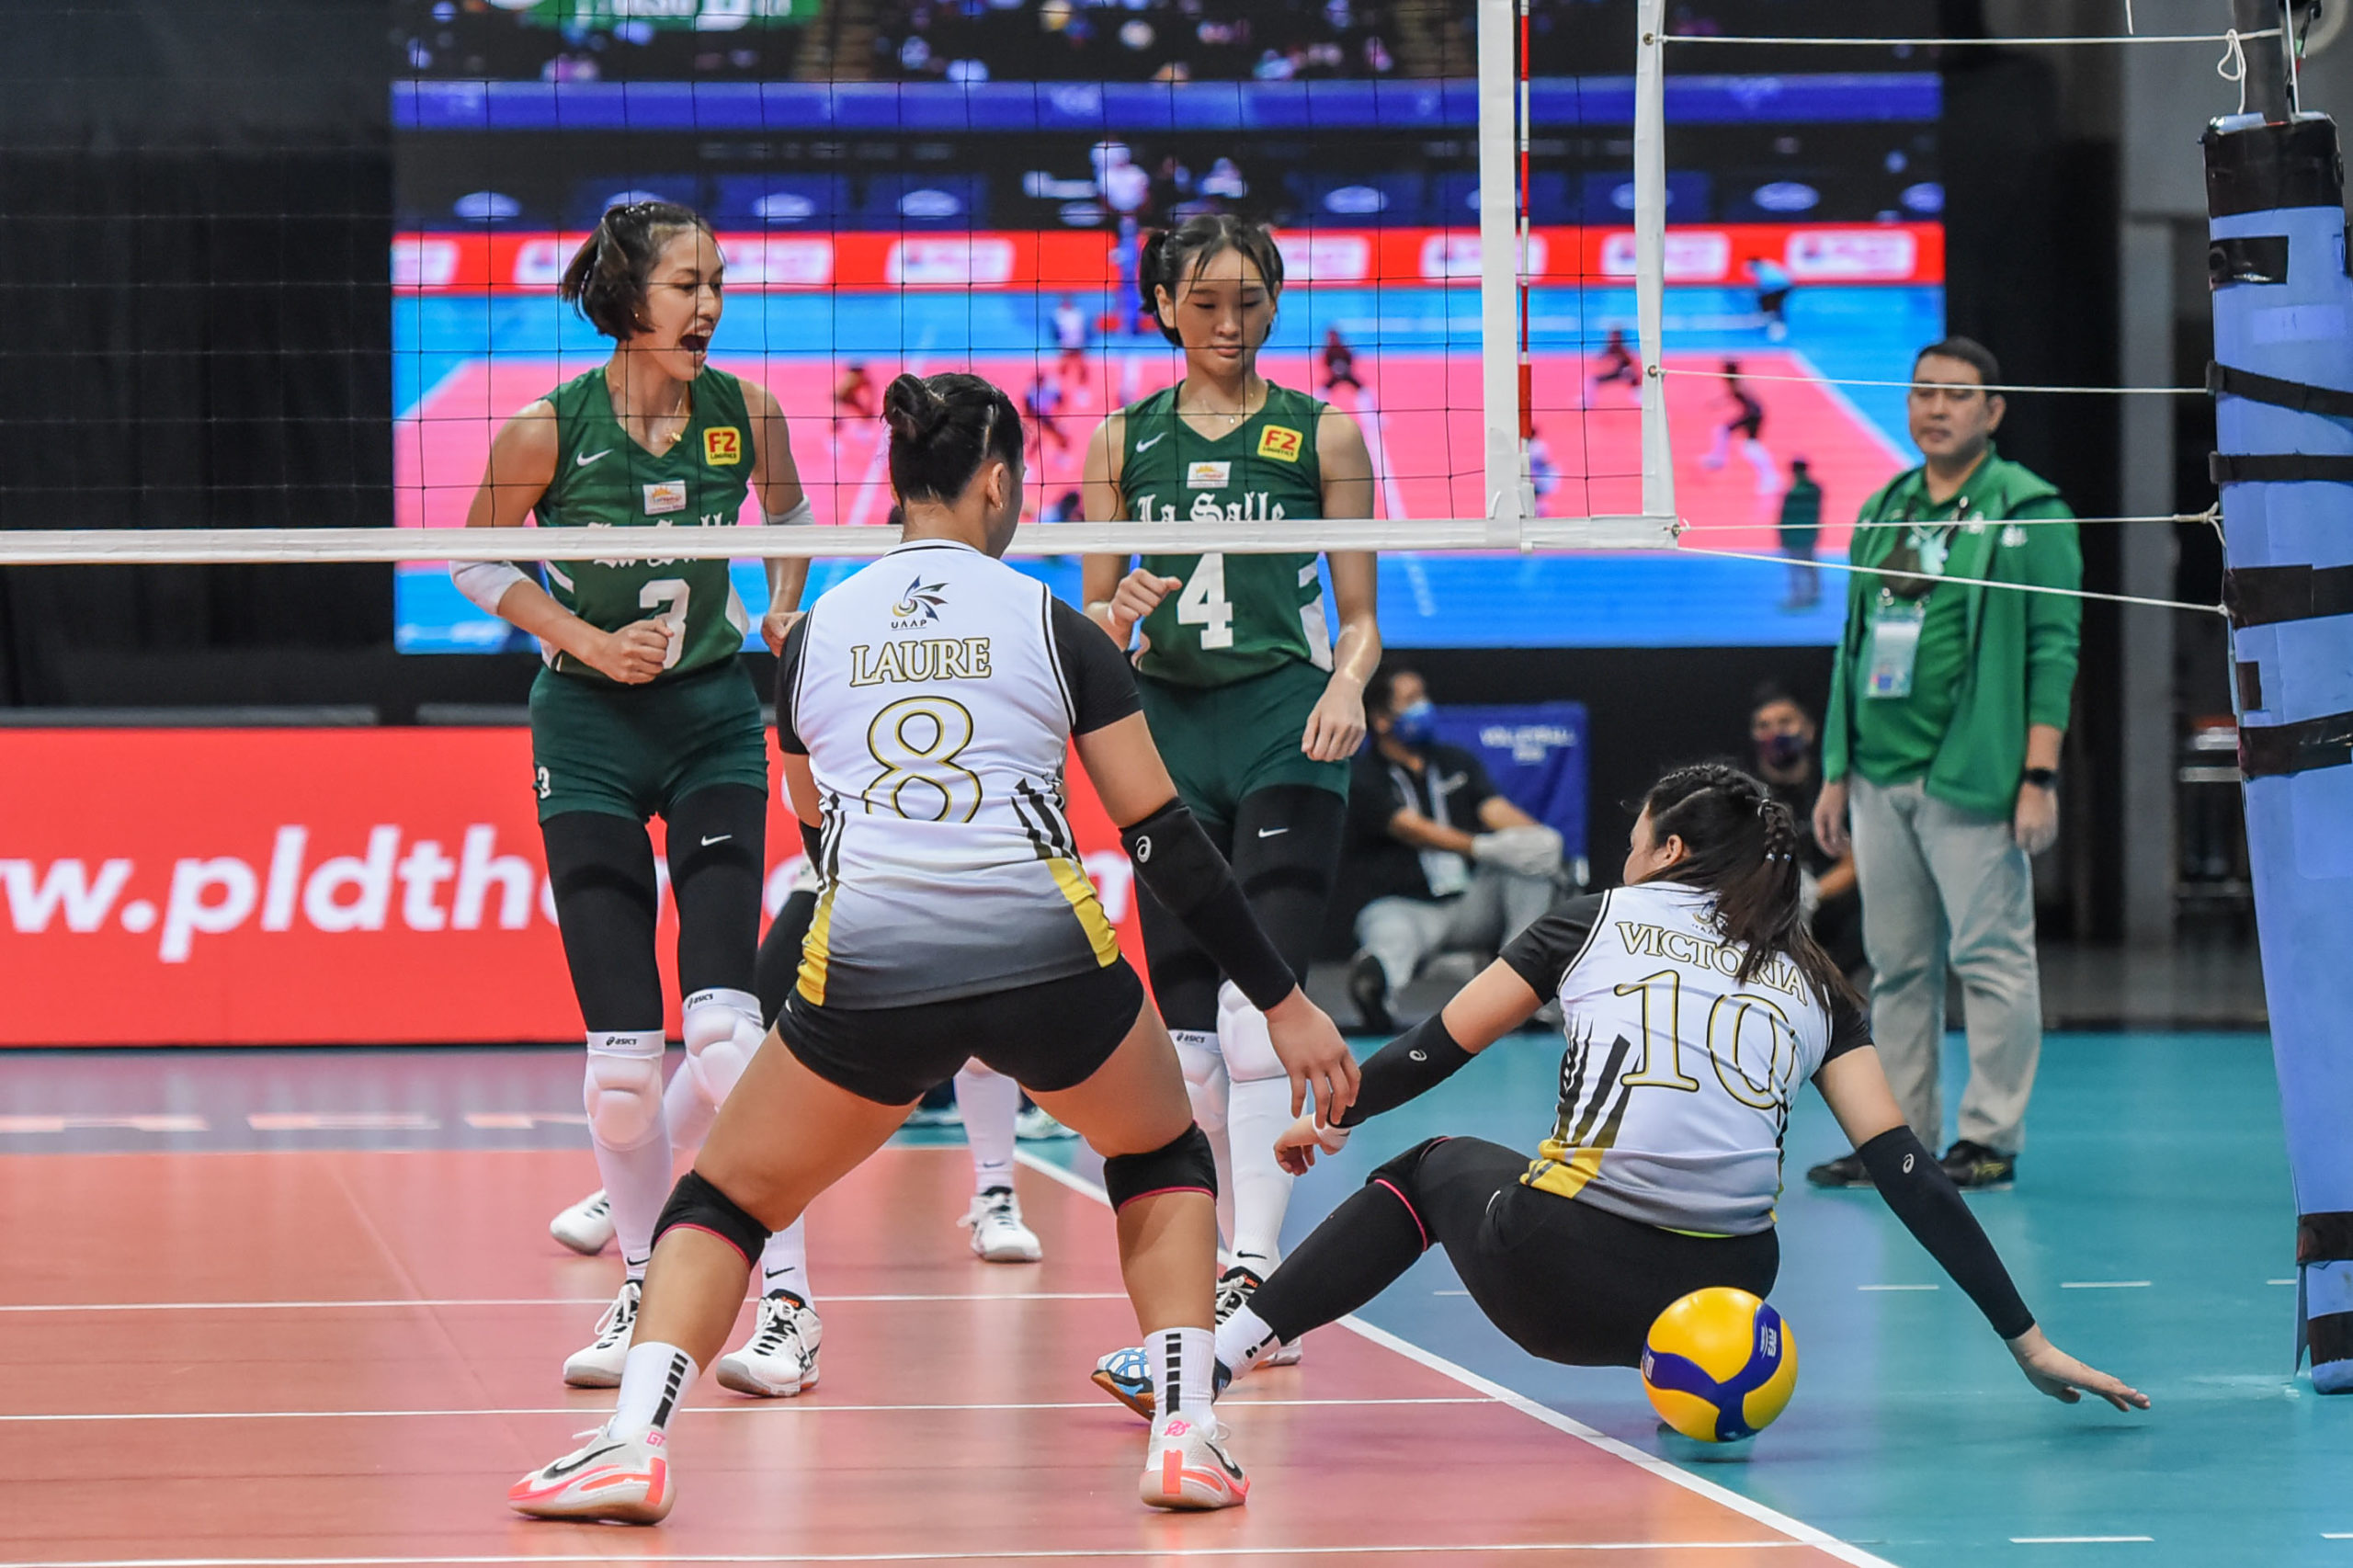 La Salle's Thea Gagate and  Leila Cruz against UST players. UAAP PHOTO